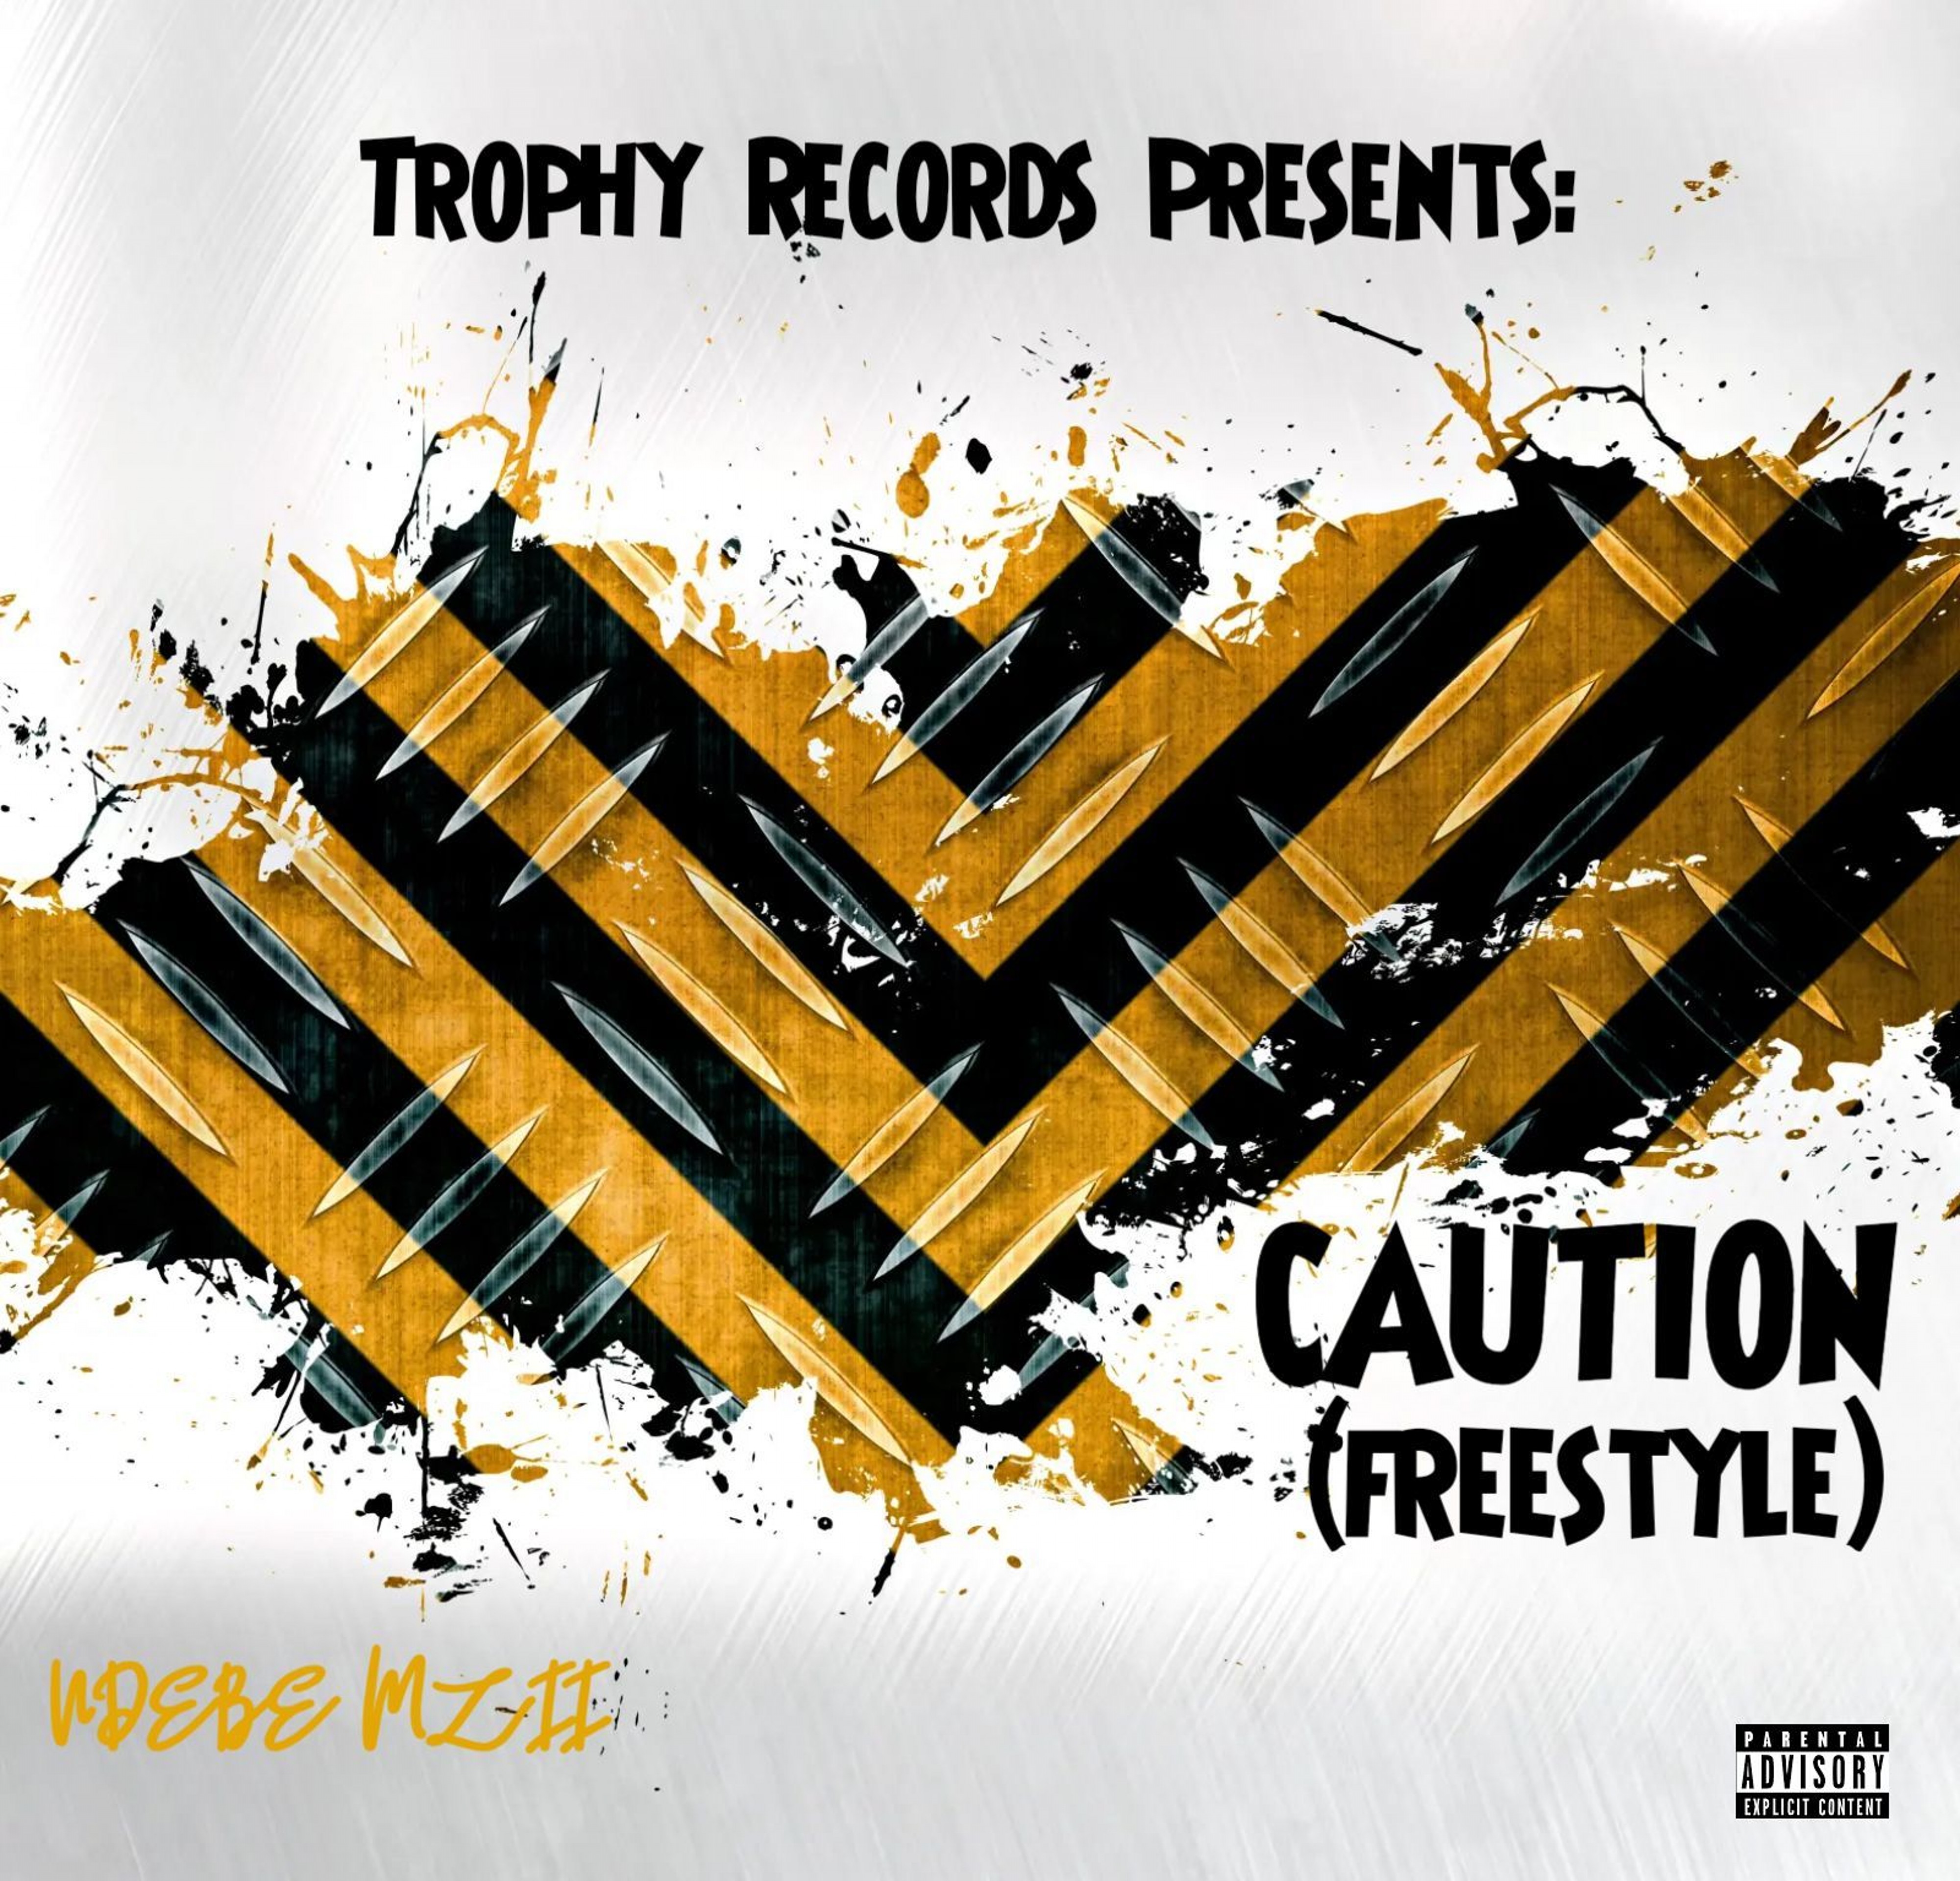 Caution (FREESTYLE) - Ndebe Mzii